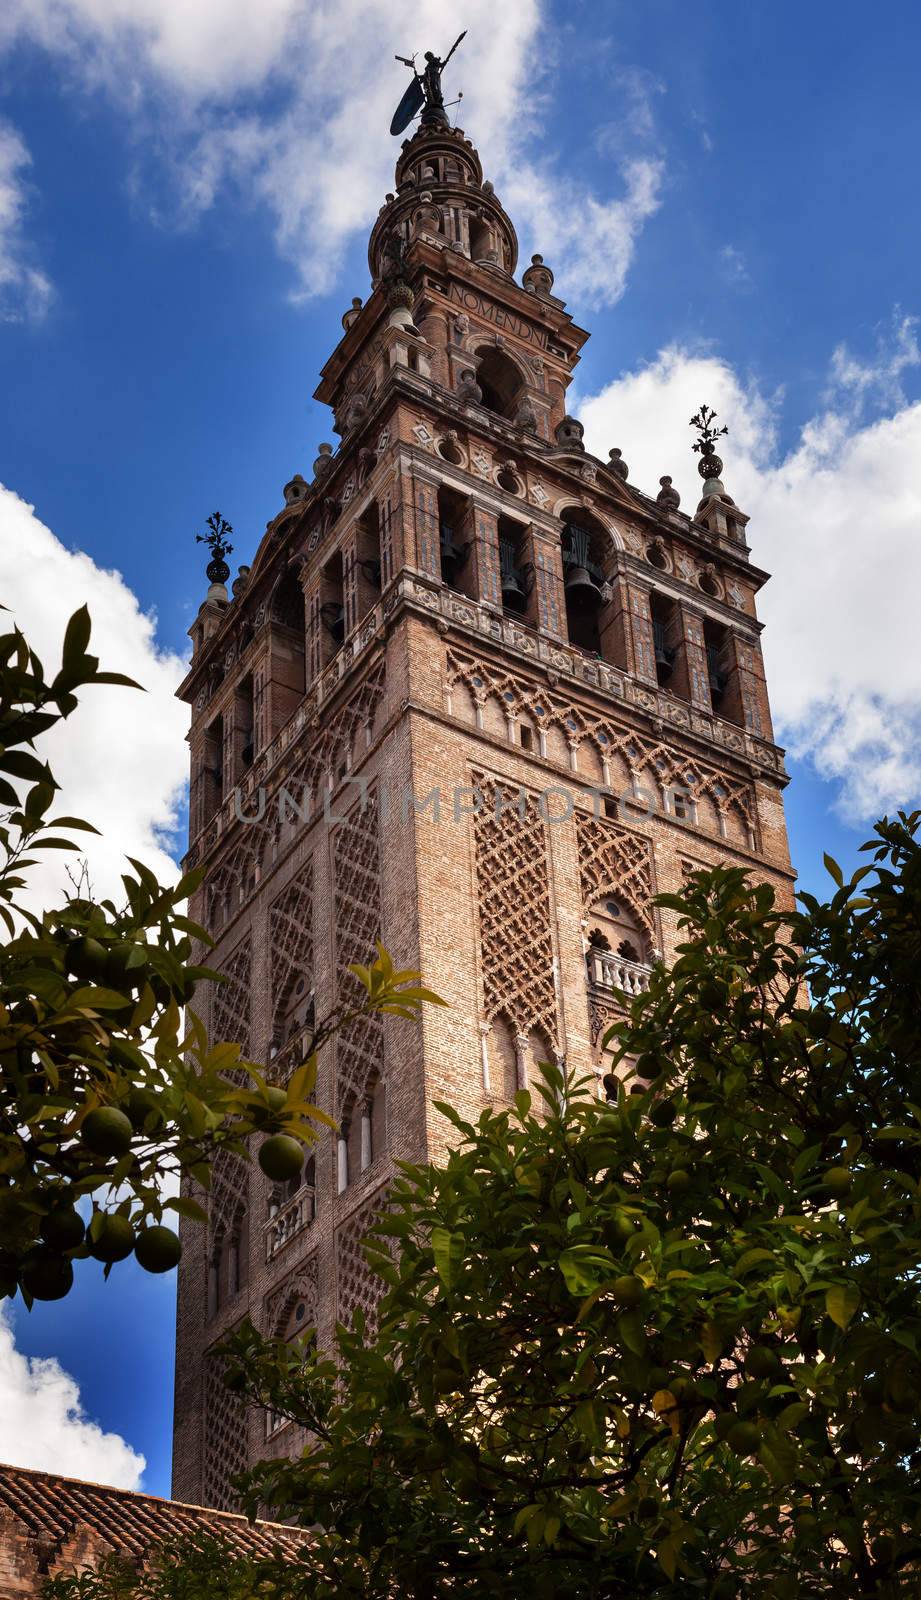 Giralda Spire, Bell Tower, From Orange Garden, Seville Cathedral, Cathedral of Saint Mary of the See, Seville, Andalusia Spain.  Built in the 1500s.  Largest Gothic Cathedral in the World and Third Largest Church in the World.  Burial Place of Christopher Columbus.  Giralda is a former minaret converted into a bell tower